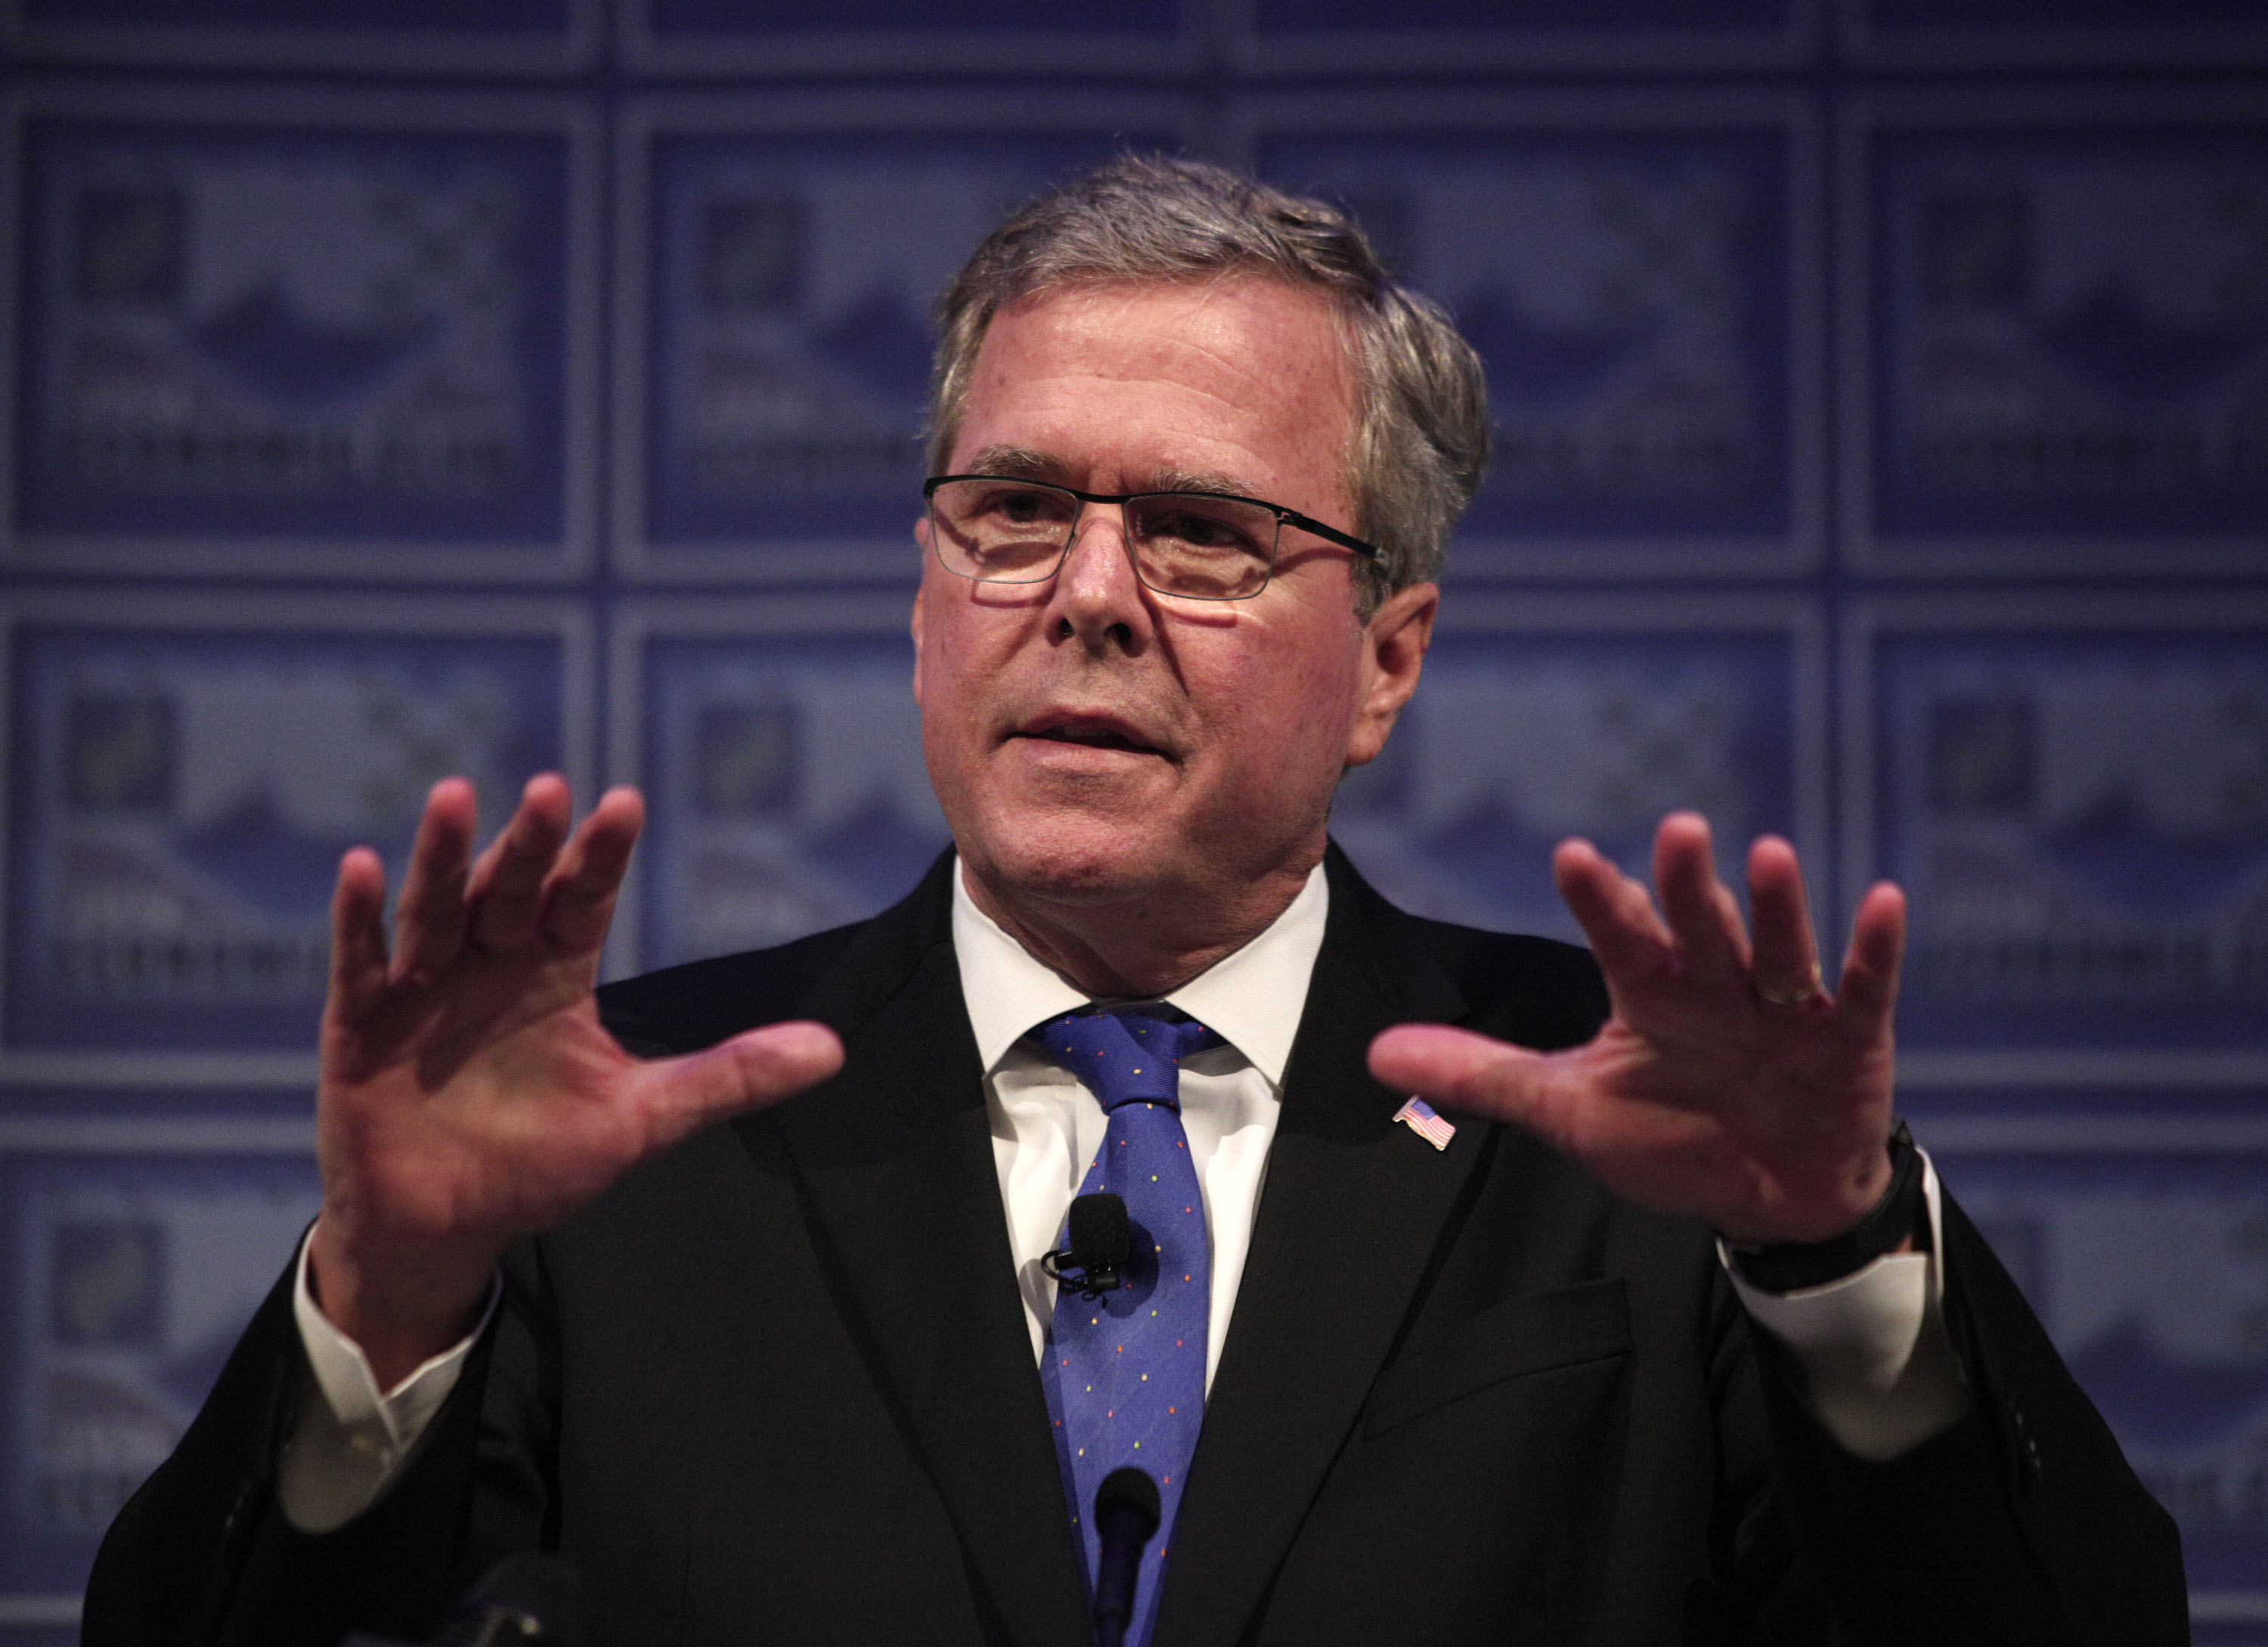 Jeb Bush says Hillary Clinton should release her emails